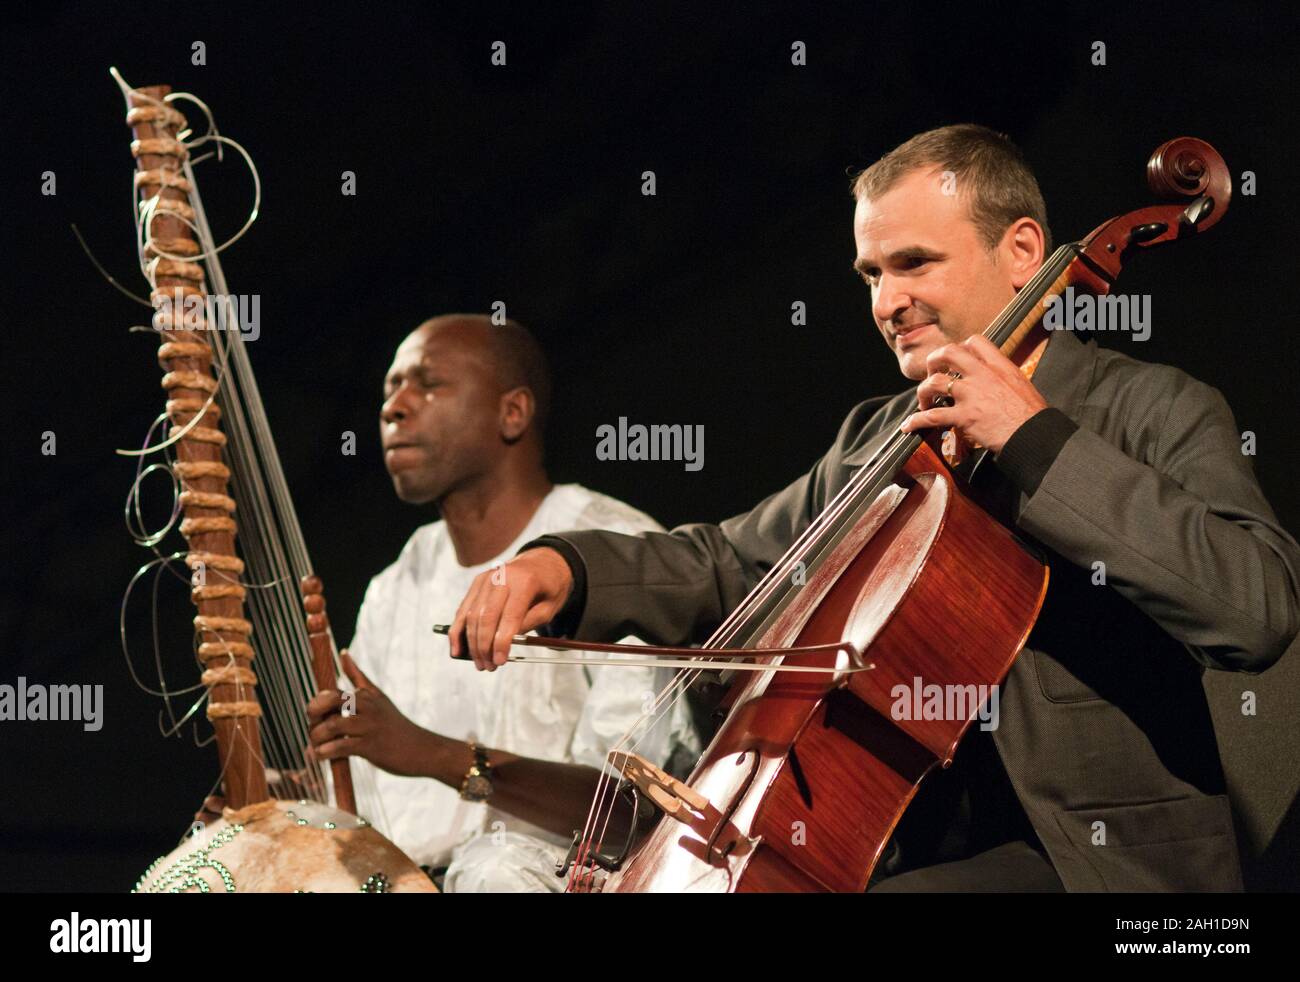 Kora player, Ballake Sissoko and cellist, Vincent Segal performing at the Womad Festival, UK, 2011 Stock Photo